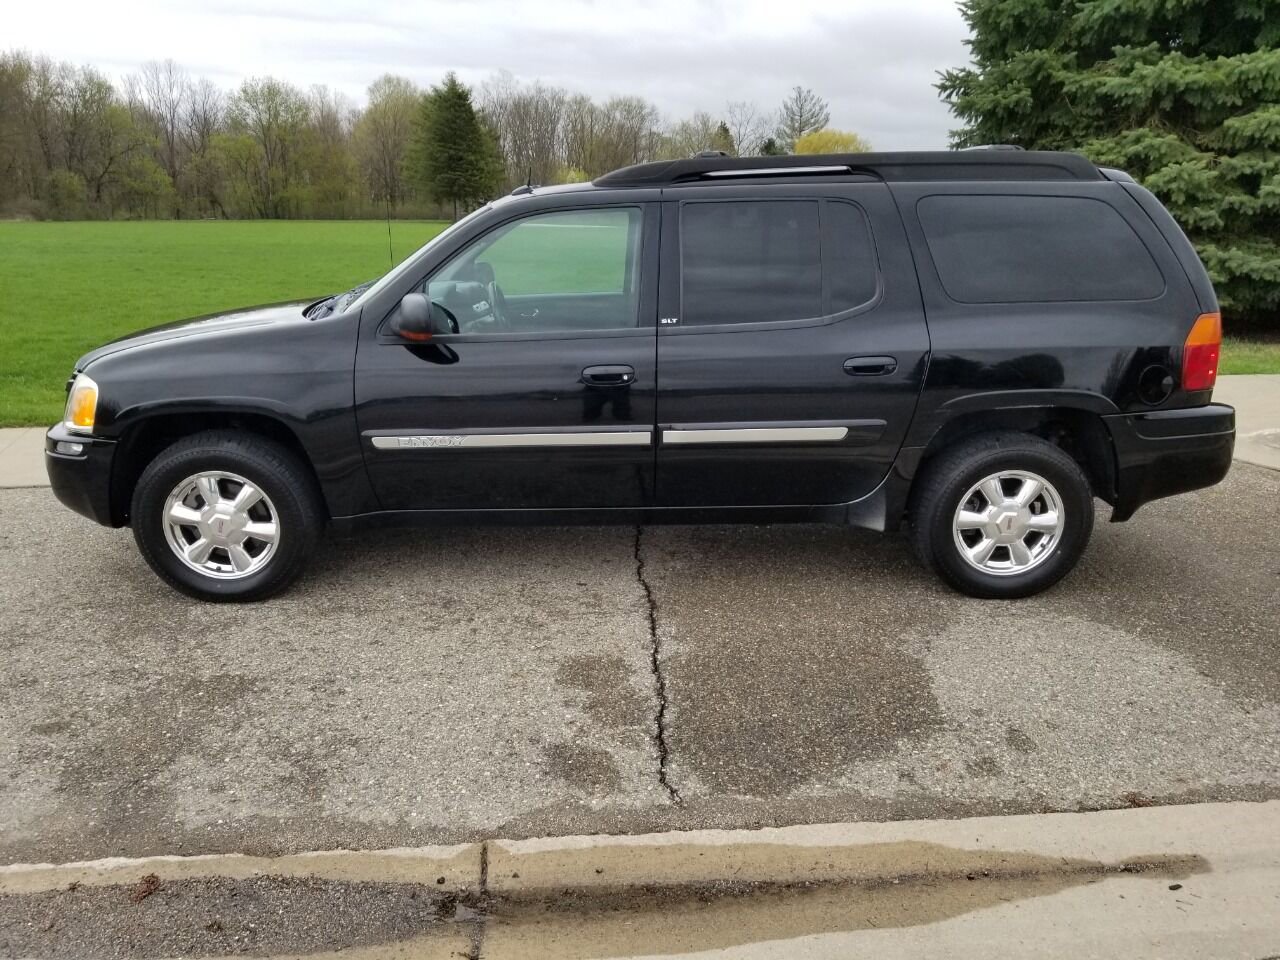 Used 2005 GMC Envoy XL for Sale Right Now - Autotrader